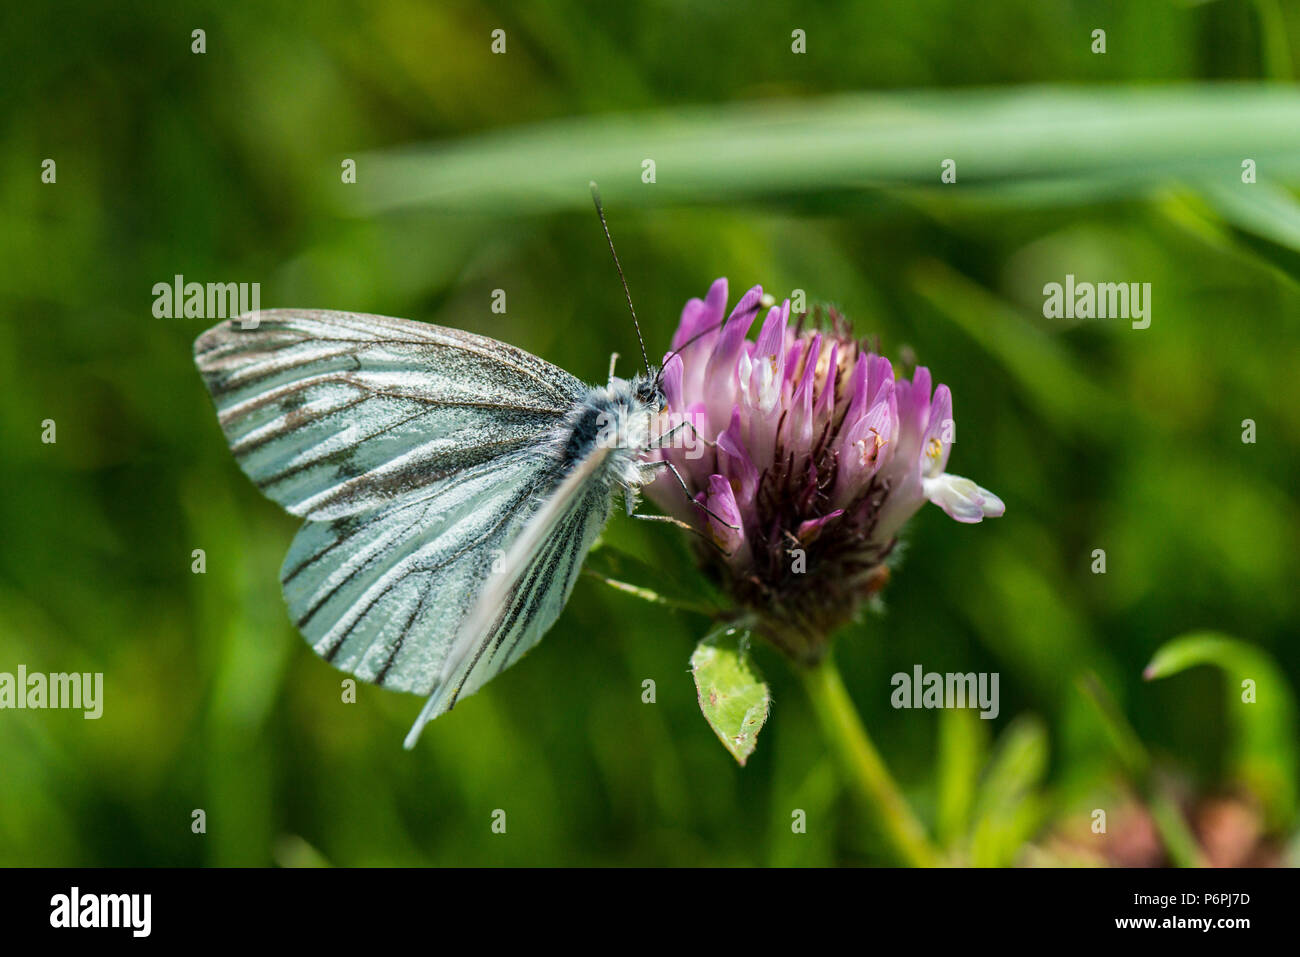 A female green-veined white butterfly (Pieris napi) on the flower of a red clover (Trifolium pratense) Stock Photo